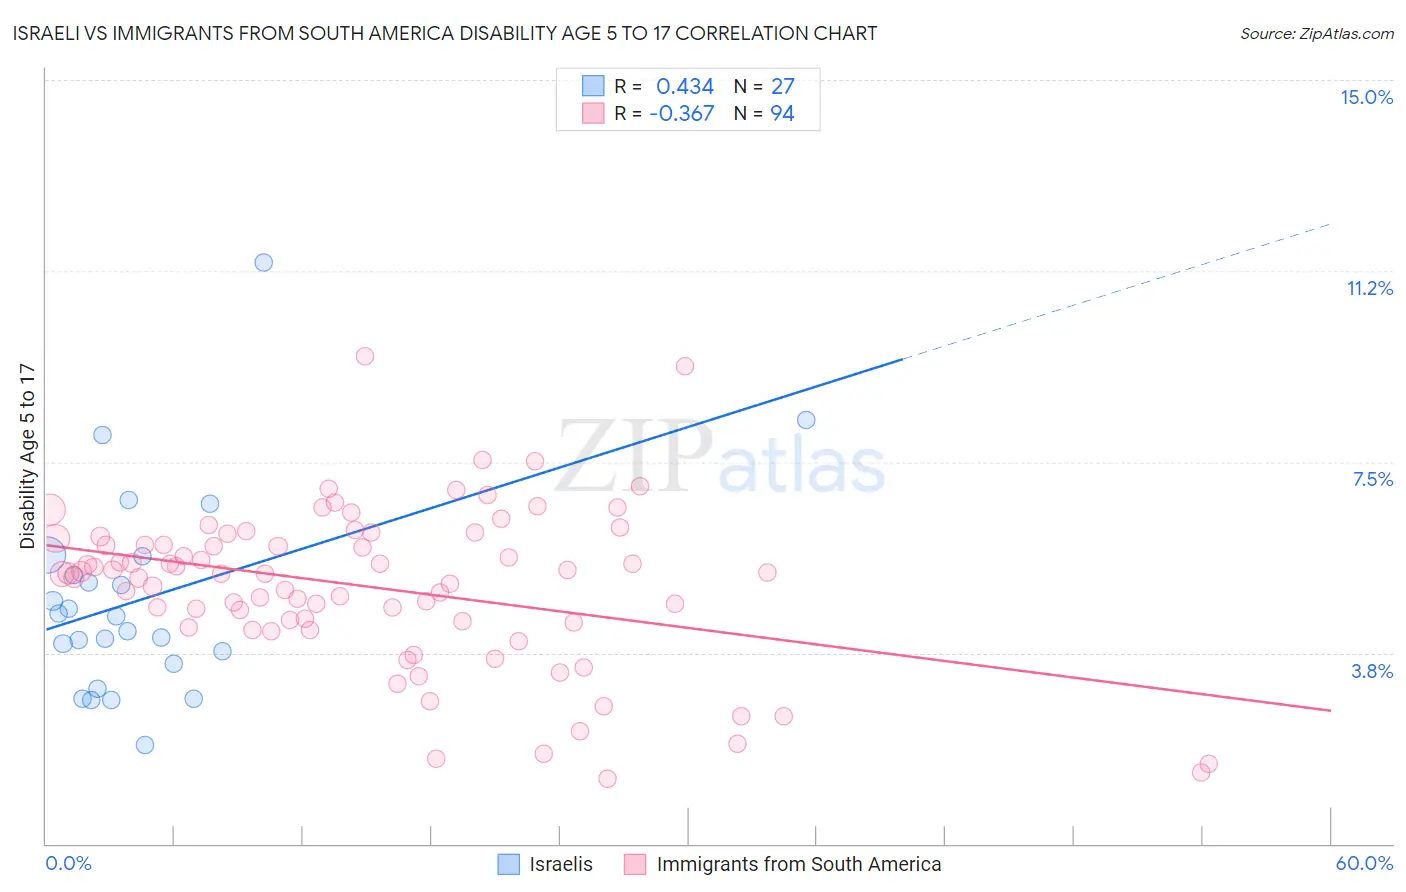 Israeli vs Immigrants from South America Disability Age 5 to 17